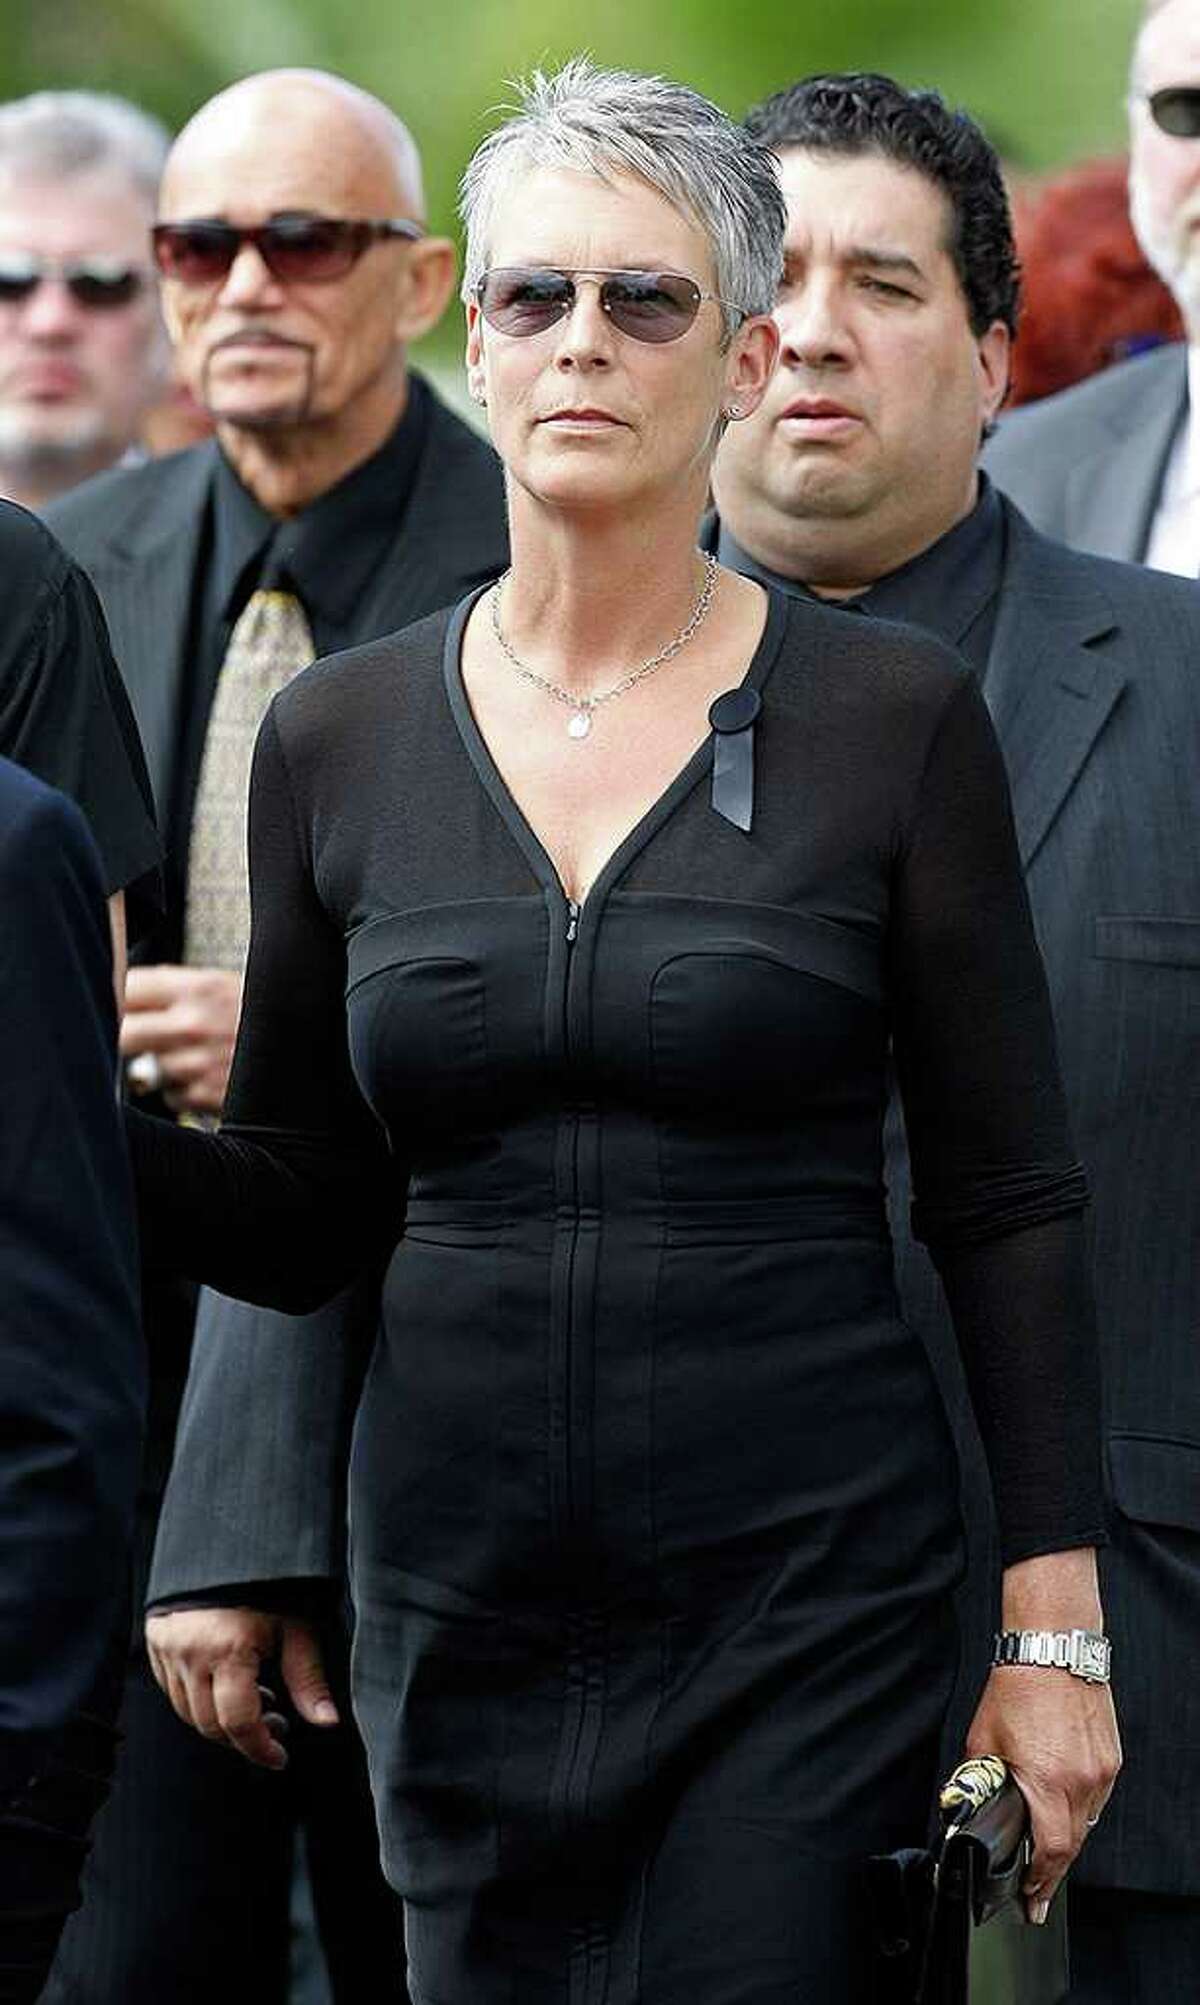 HENDERSON, NV - OCTOBER 04: Actress Jamie Lee Curtis attends the funeral for her father, actor Tony Curtis, at Palm Mortuary & Cemetary October 4, 2010 in Henderson, Nevada. Curtis died on September 29 at age 85. (Photo by Ethan Miller/Getty Images) *** Local Caption *** Jamie Lee Curtis